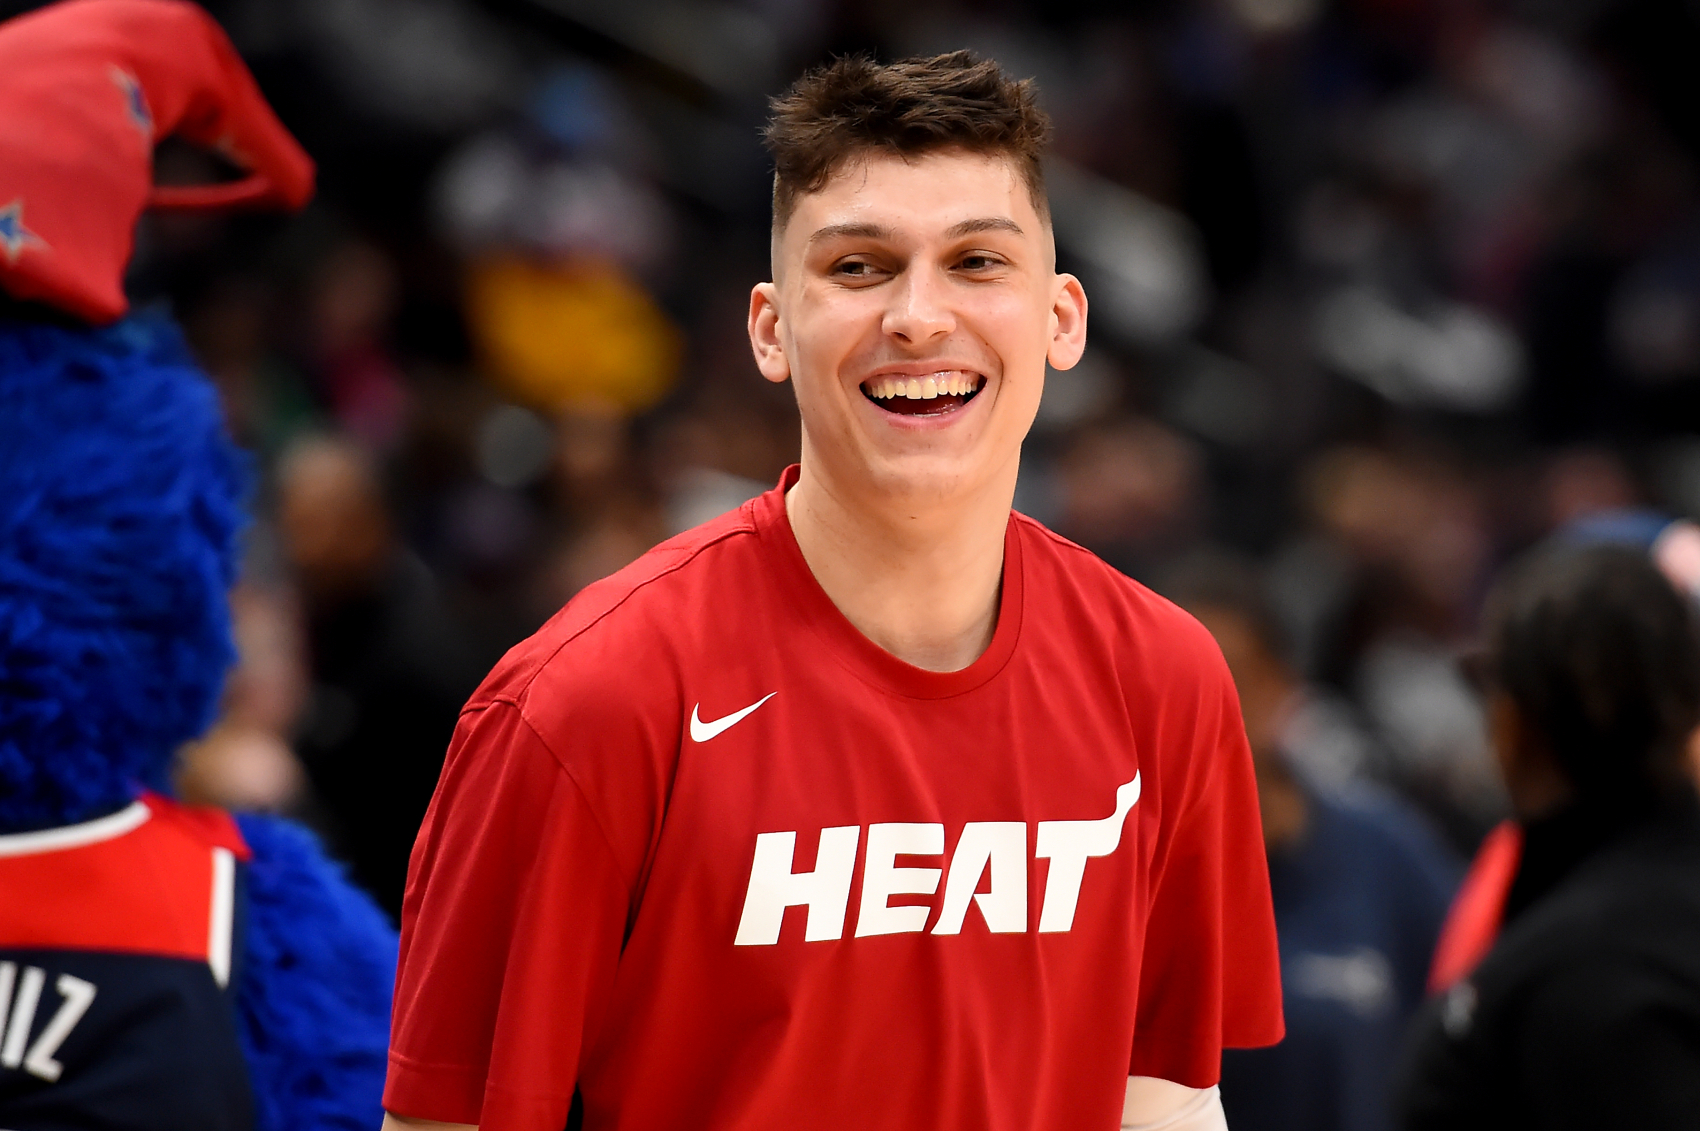 Tyler Herro has had an incredible rookie season with the Miami Heat. He just accomplished something no other rookie has this century.